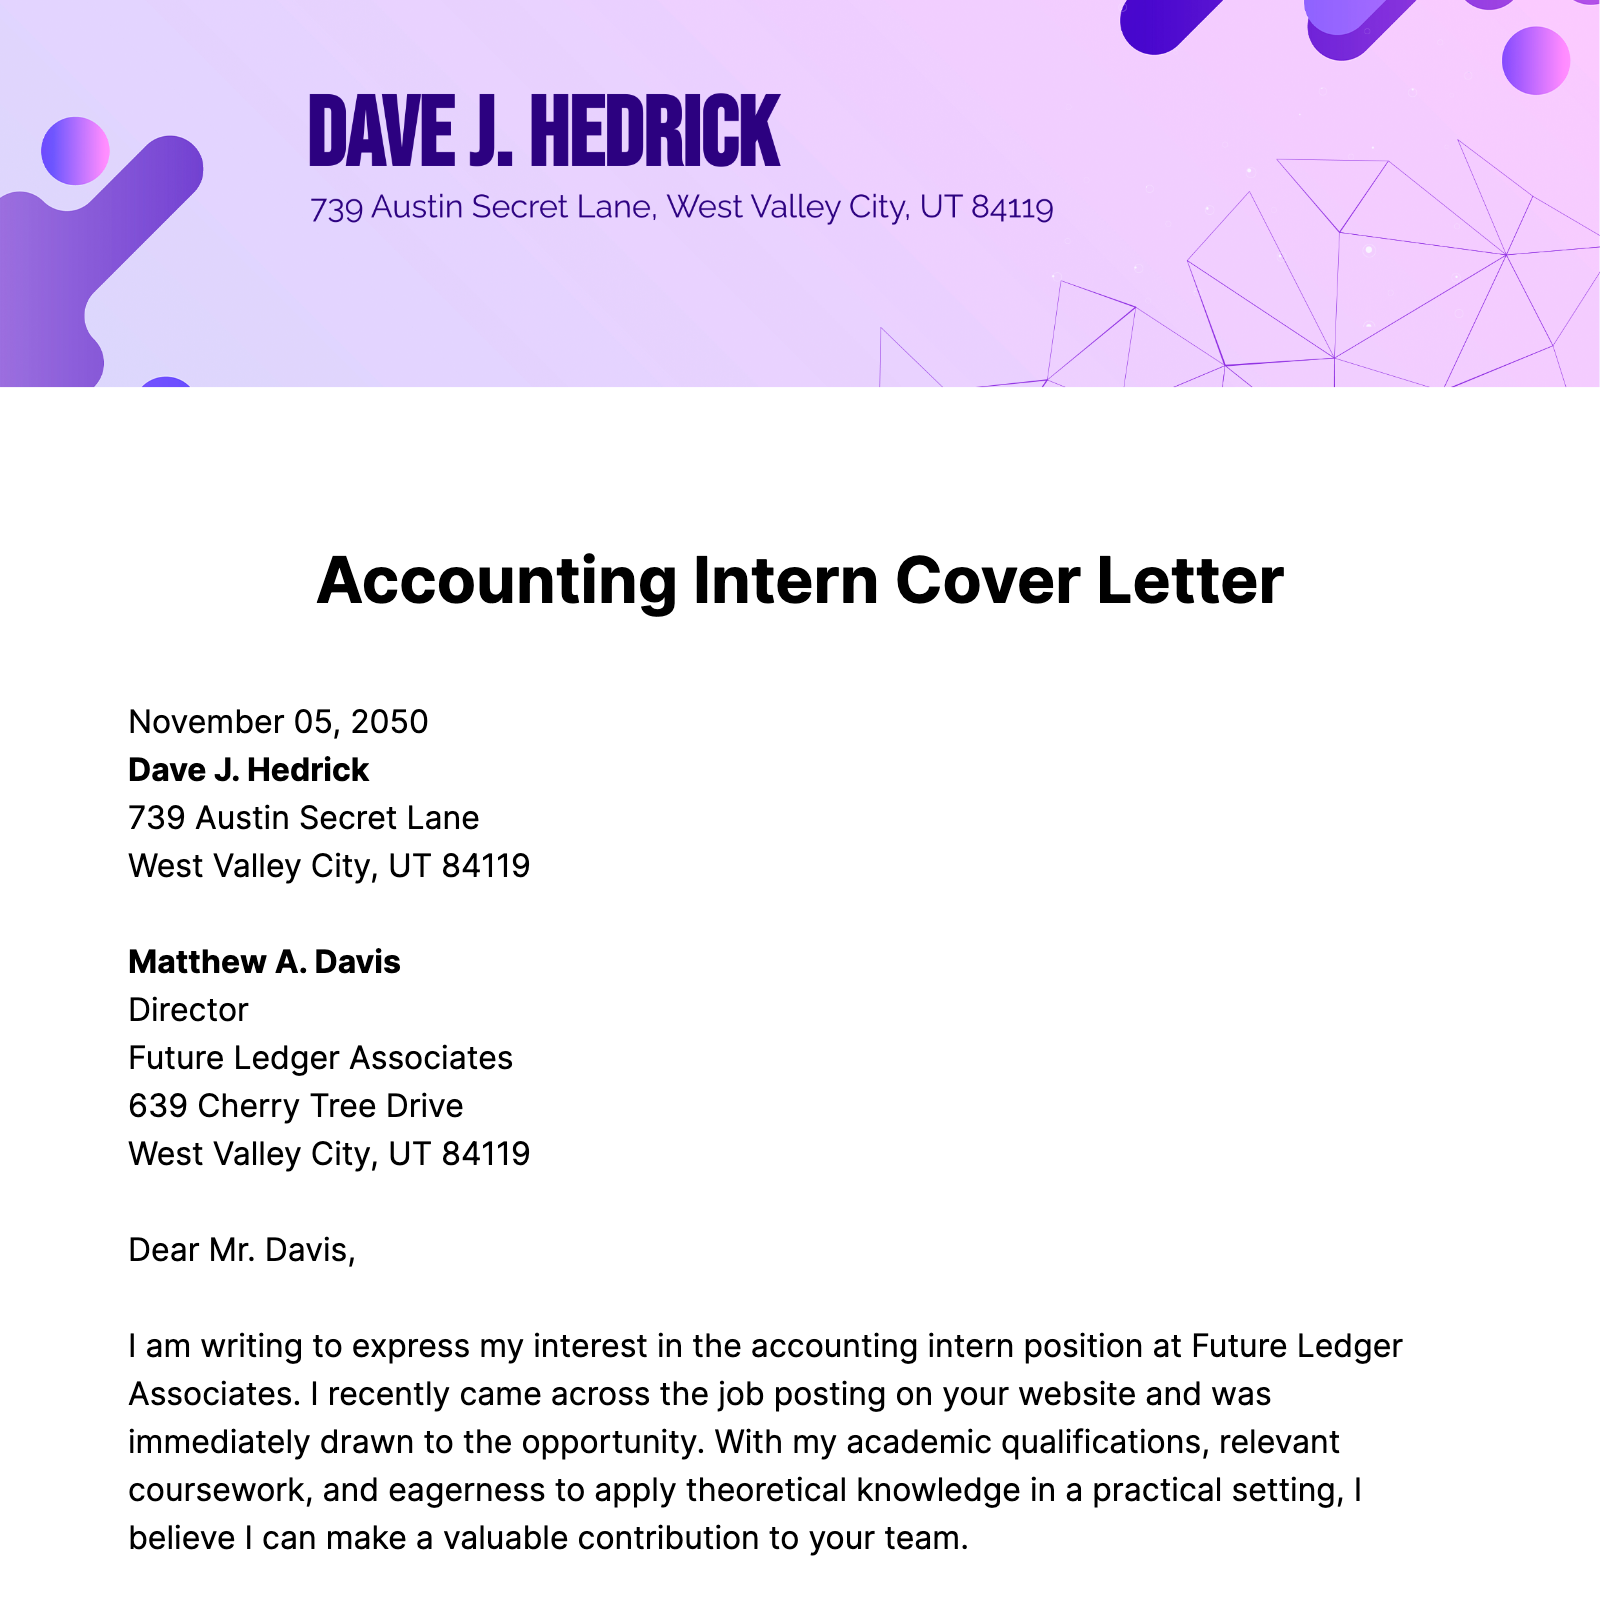 Accounting Intern Cover Letter Template